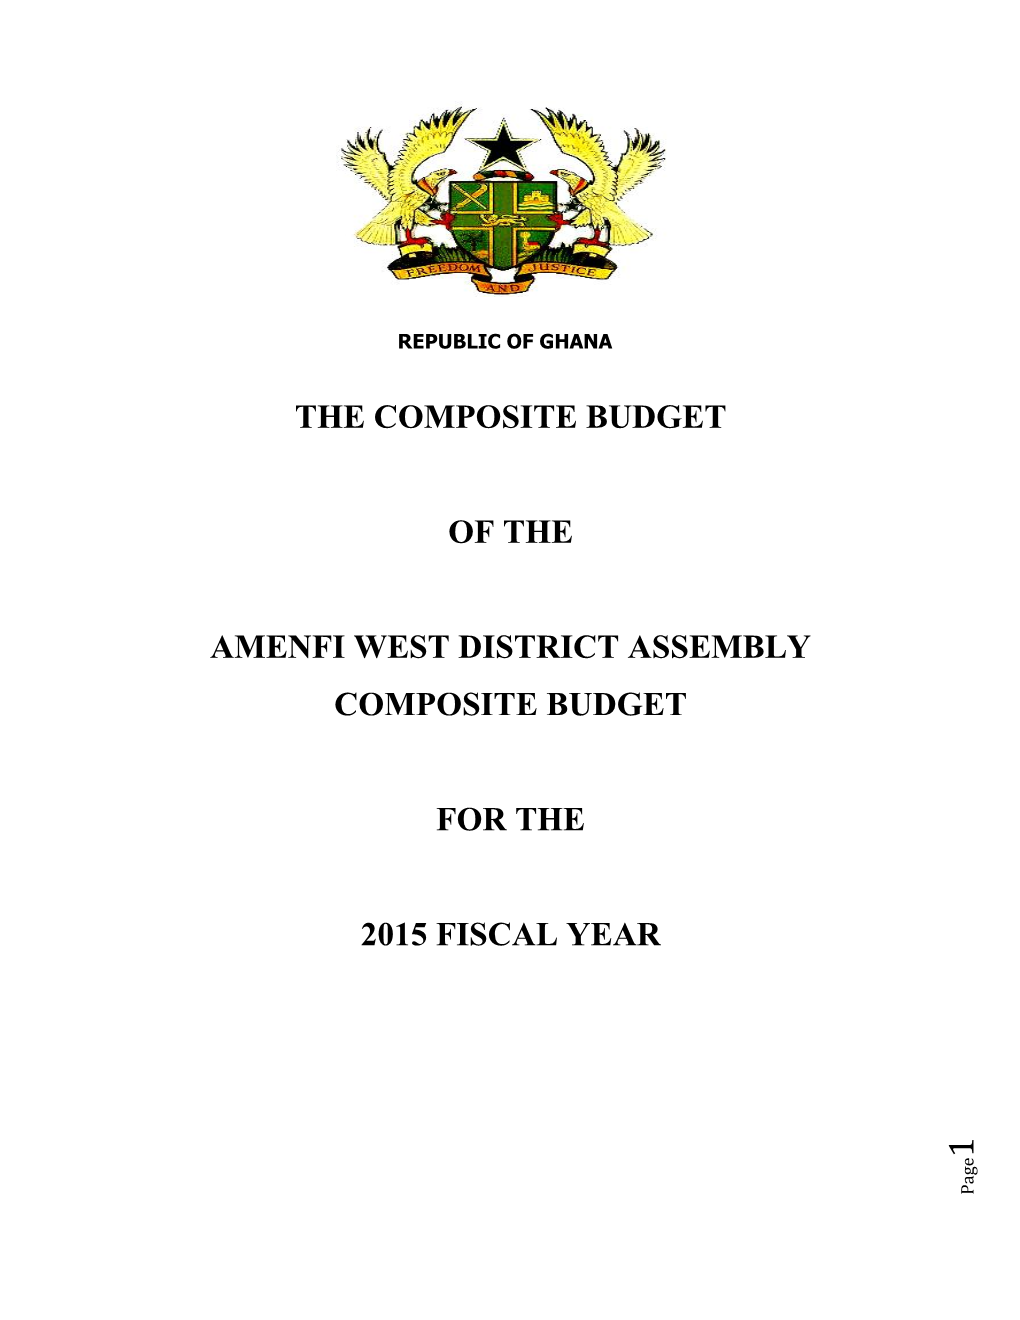 The Composite Budget of the Amenfi West District